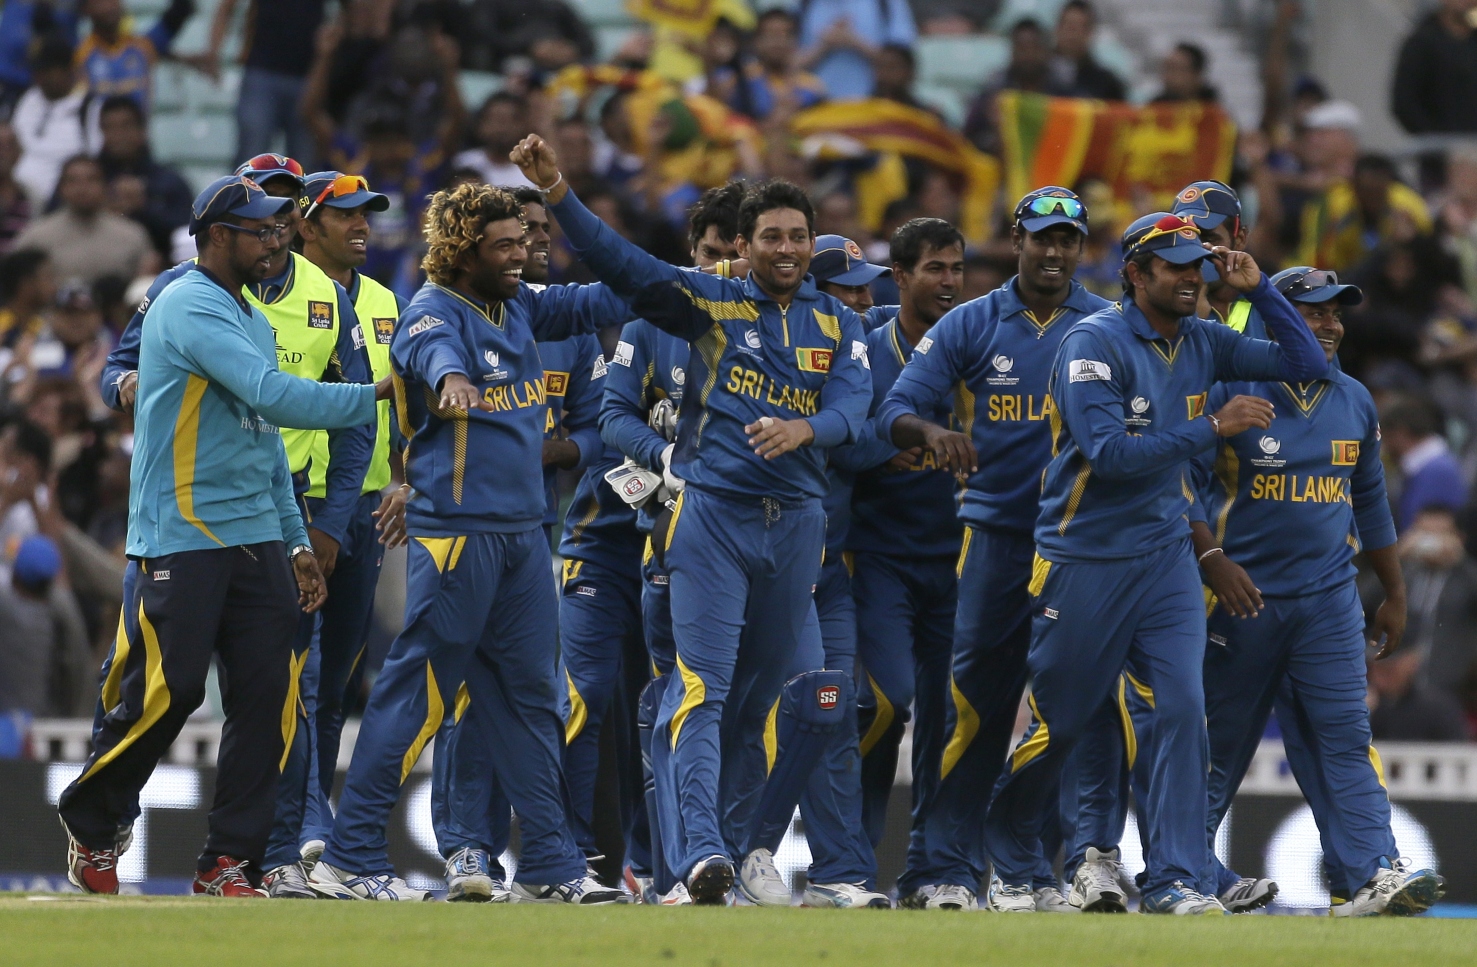 Sri Lanka's Tilakaratne Dilshan (centre) celebrates with teammates after taking the wicket of Australia's Clint McKay caught and bowled to win their ICC Champions Trophy cricket match at the Oval cricket ground in London, on Monday. Photo: AP